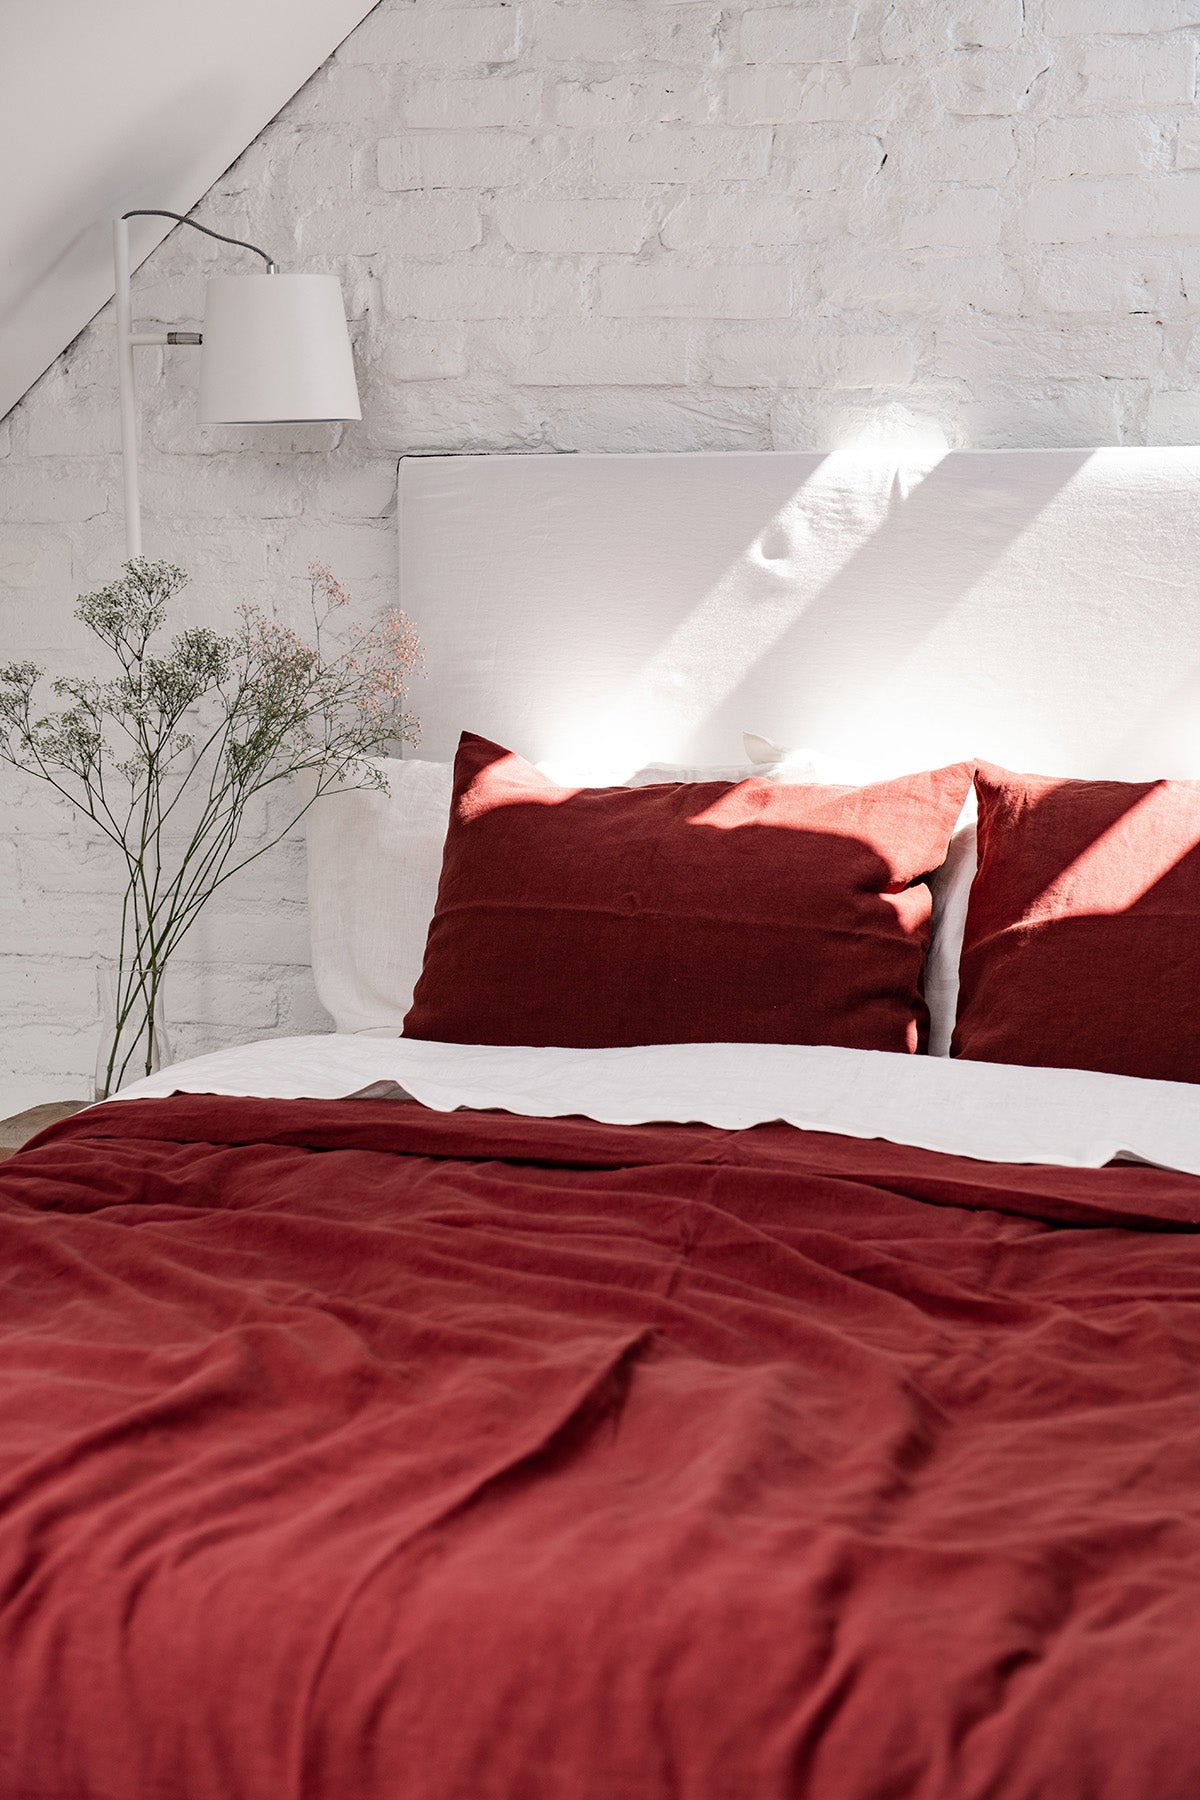 Terracotta LInen Pillowcase On Bed With Terracotta sheets By AmourlInen